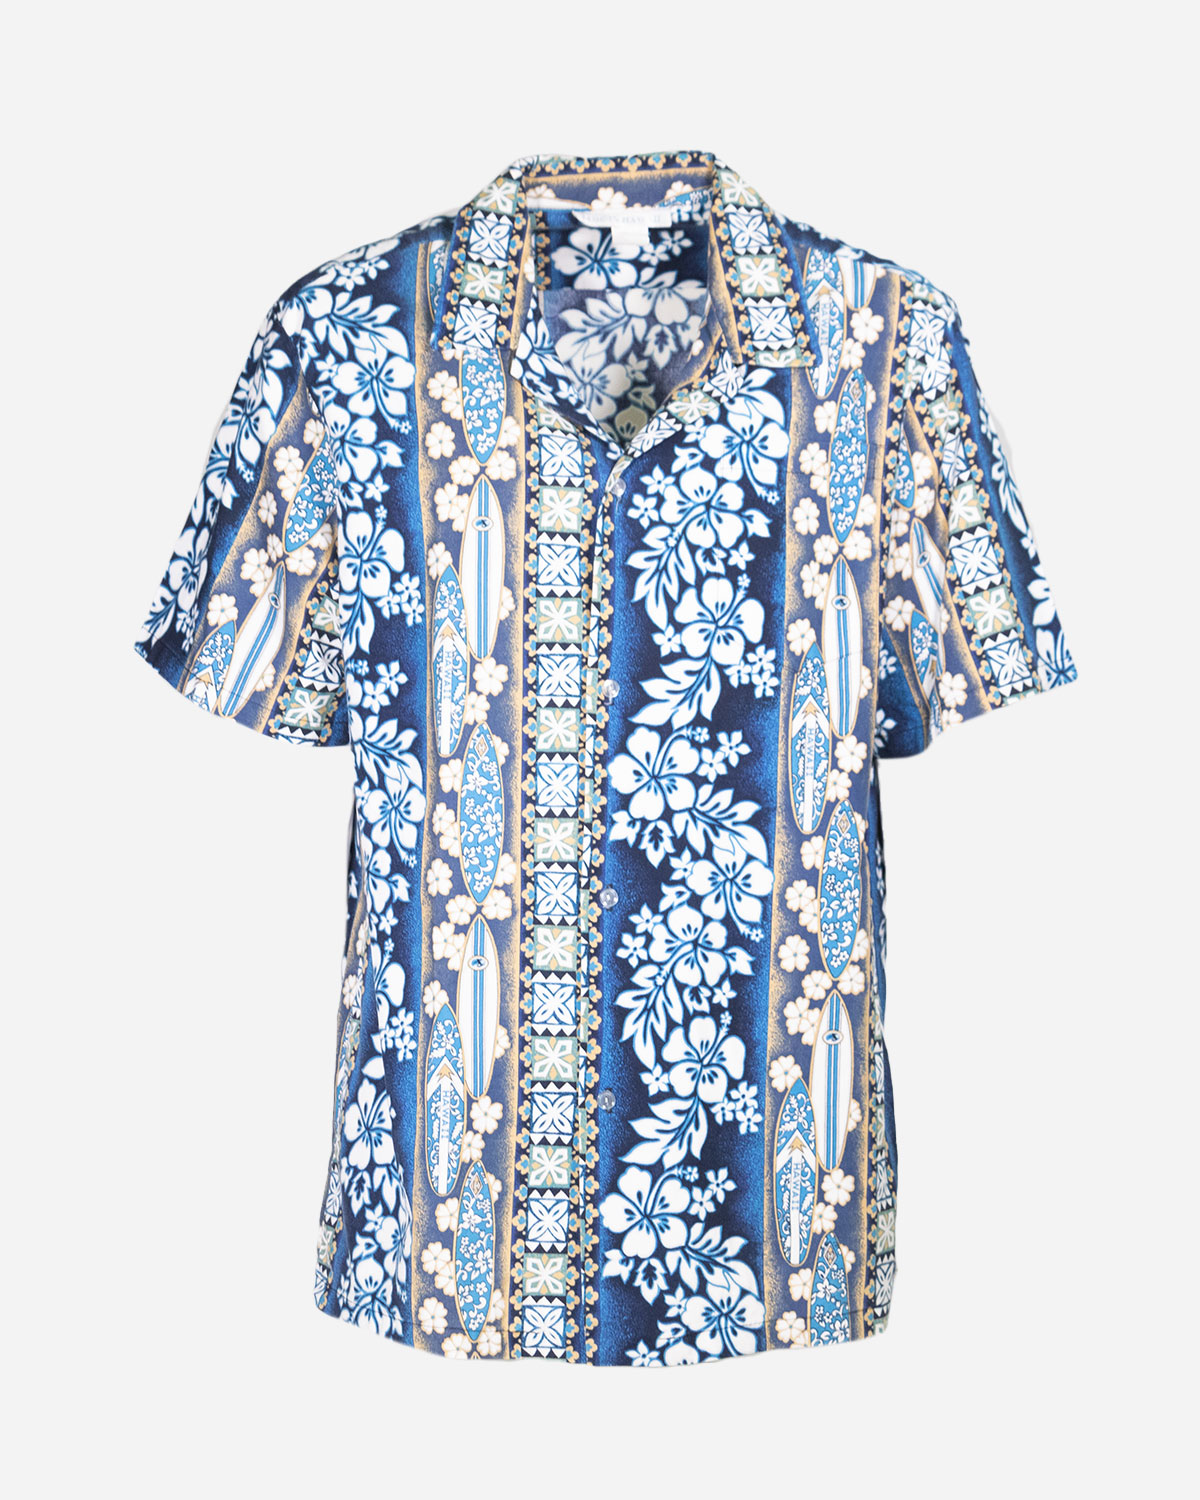 Hawaiian patterned shirts for men: 4 pieces